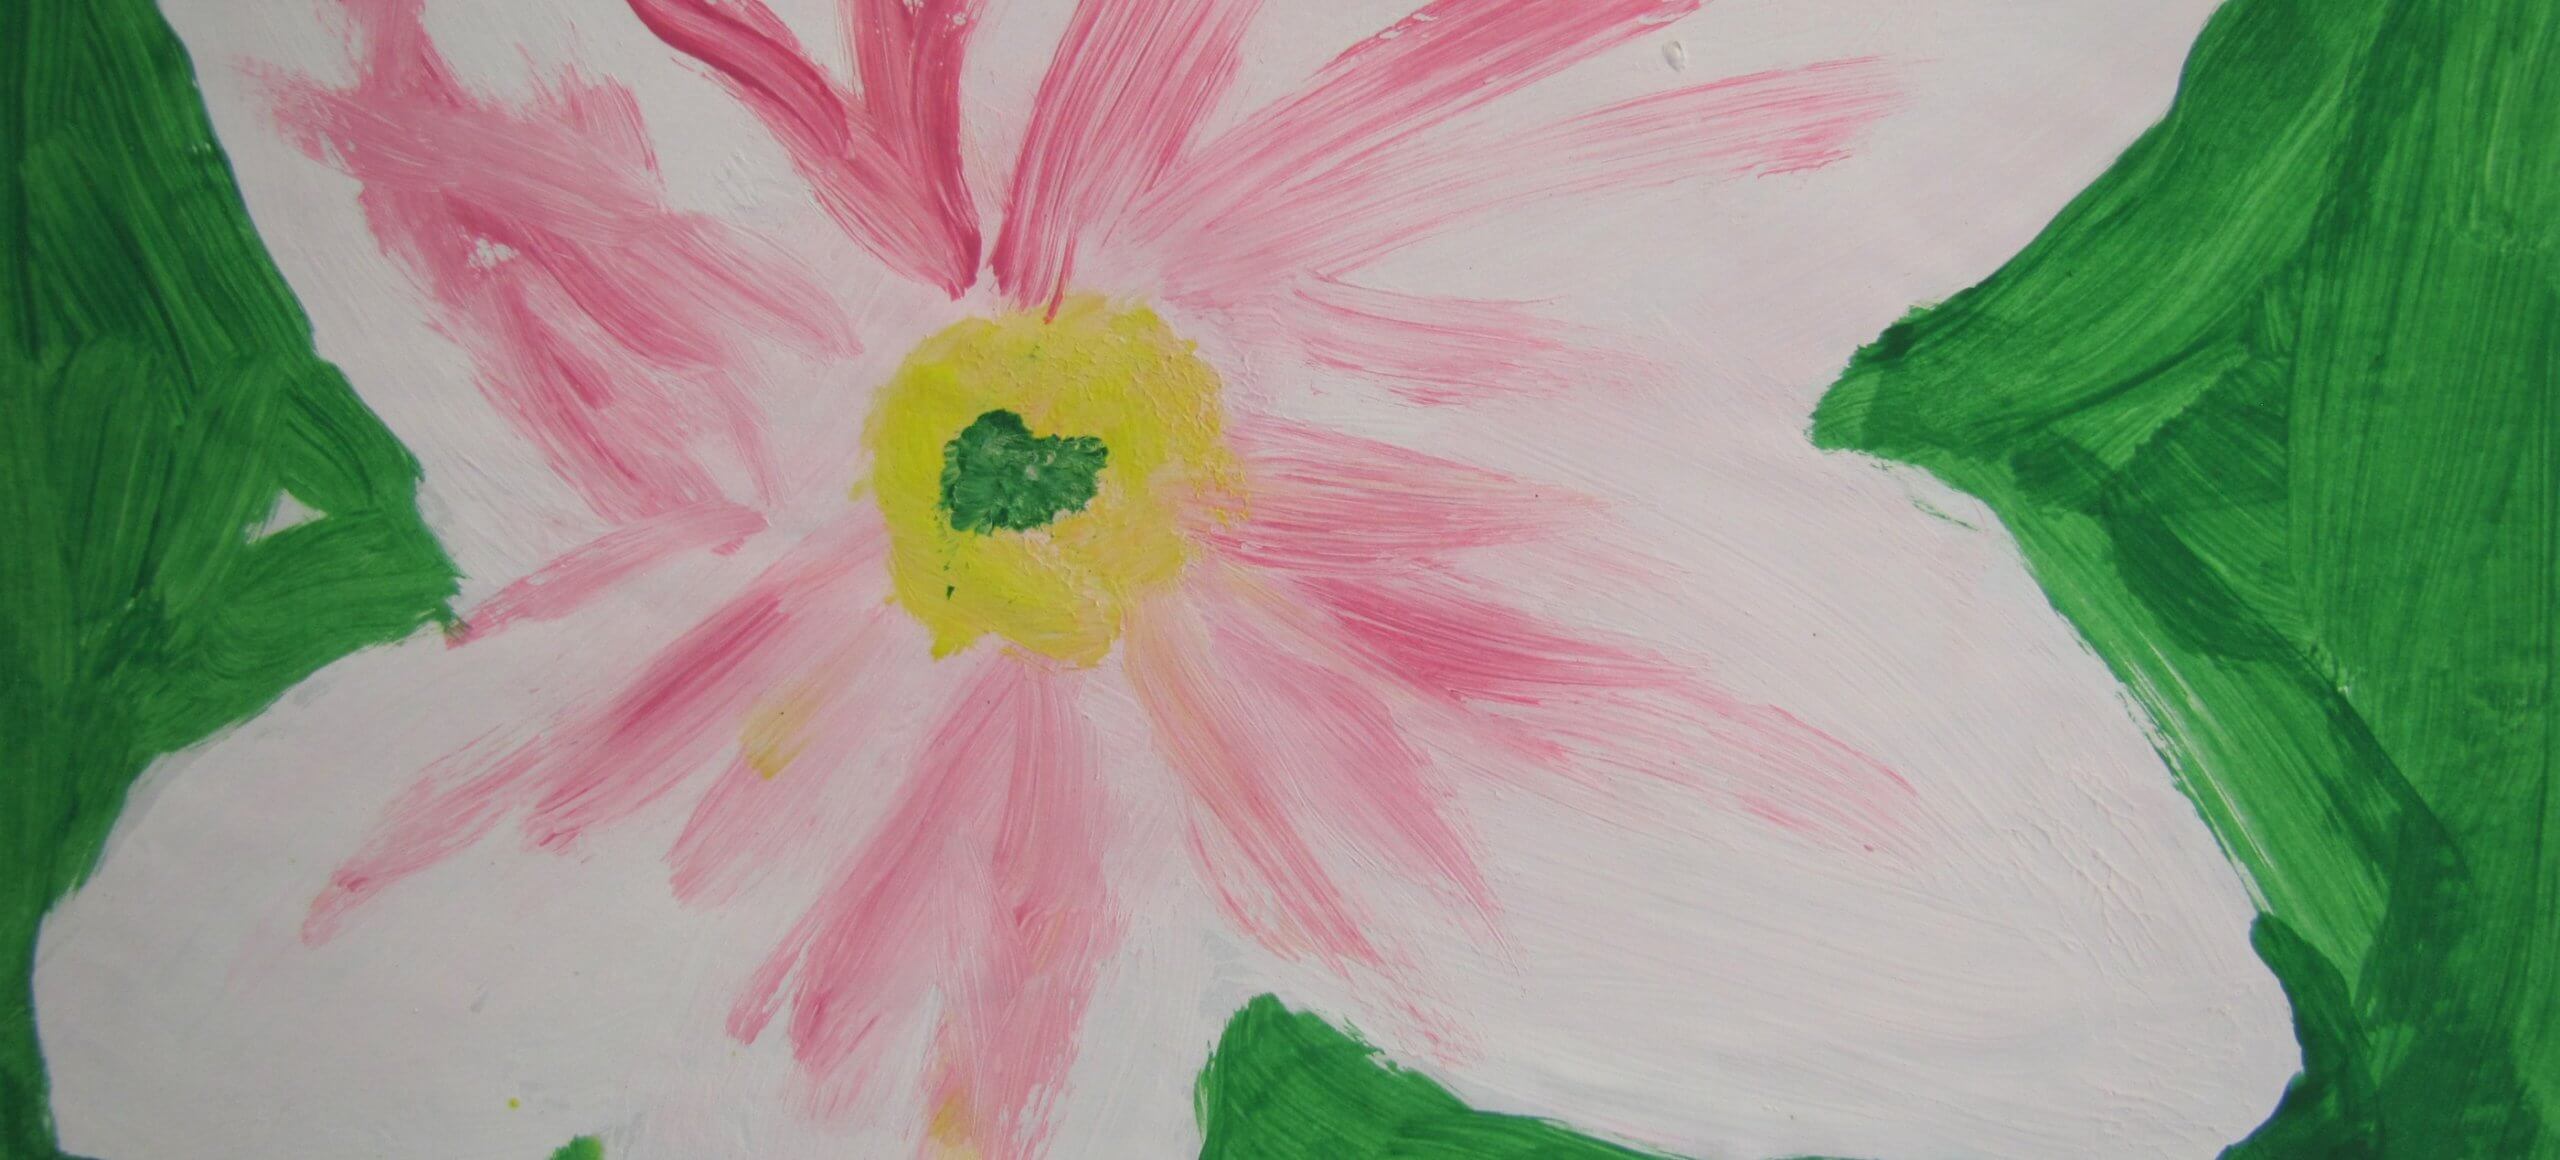 A painting of a pink and white flower.